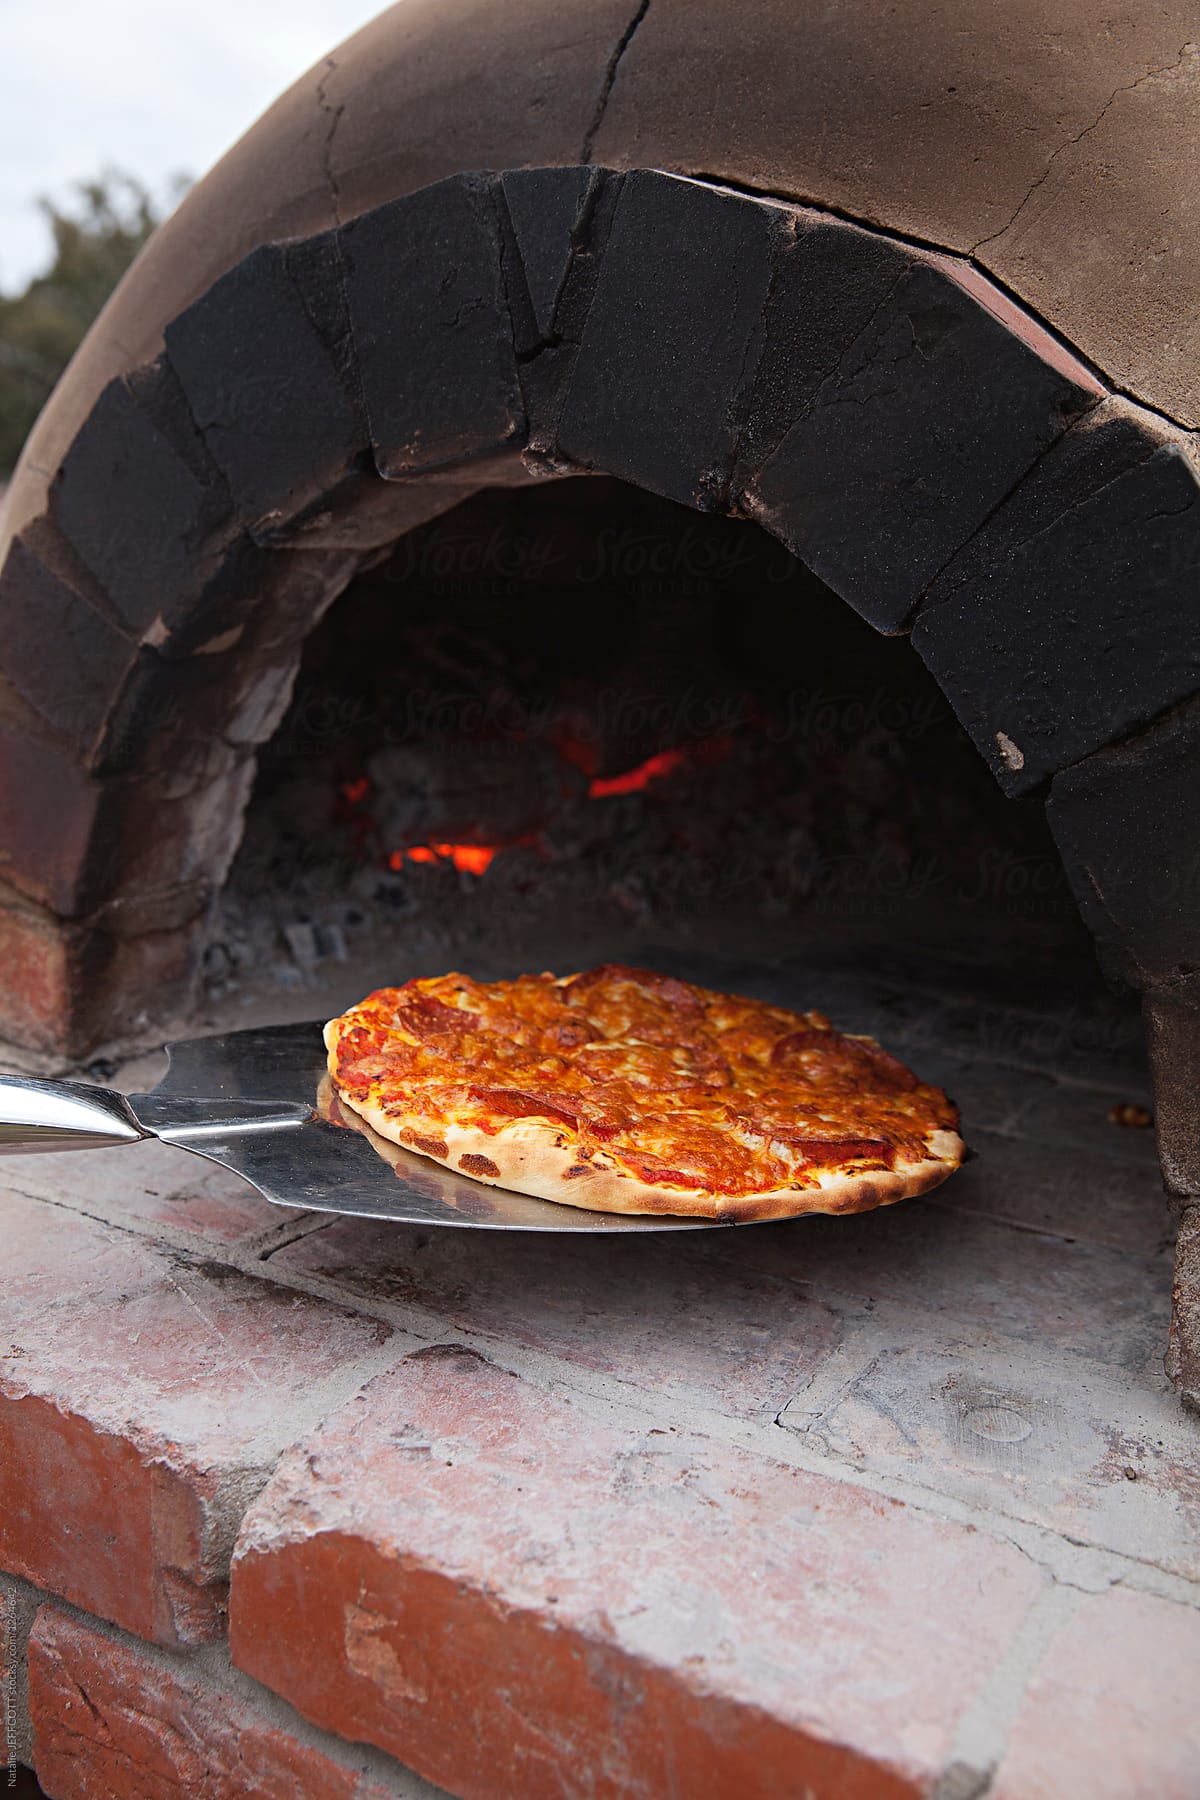 cooking home made pizza in wood fired oven